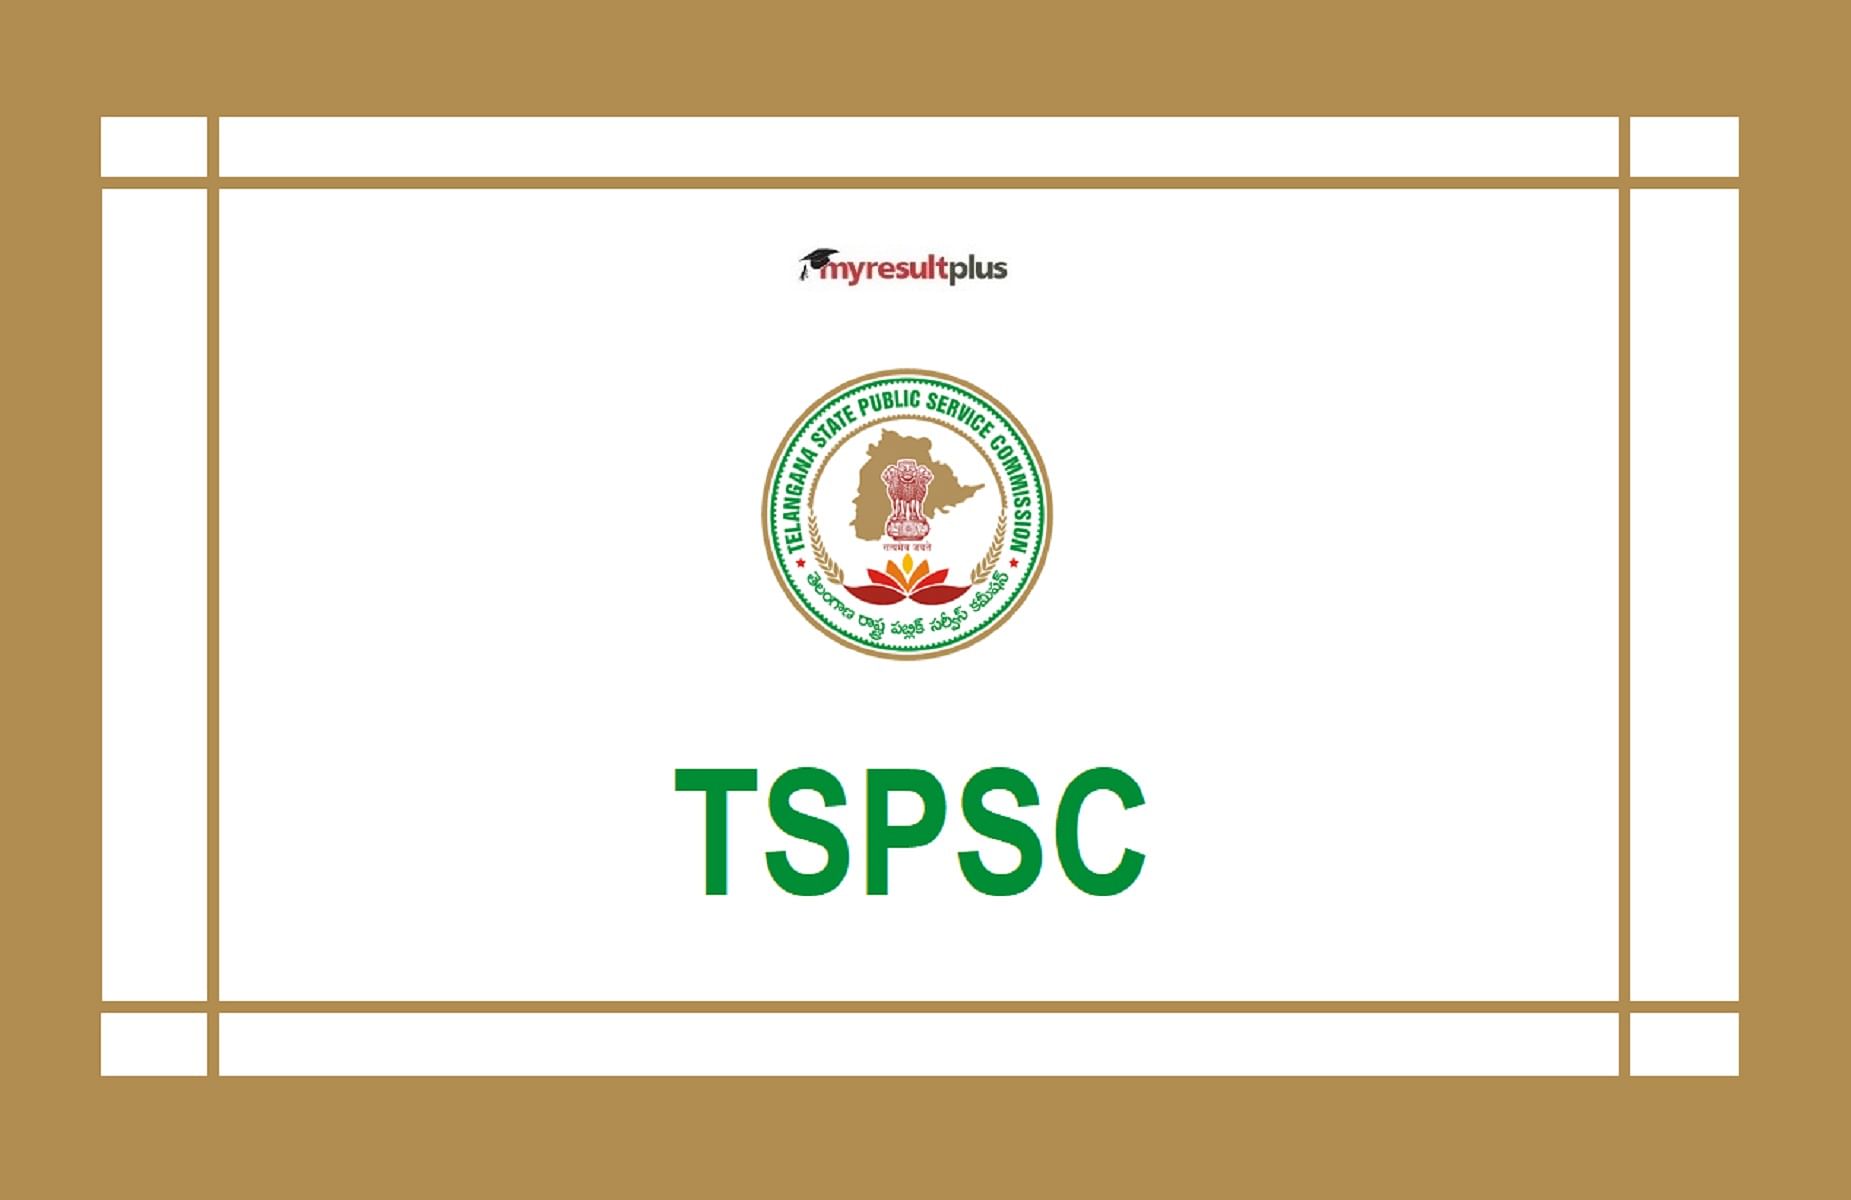 TSPSC Group 1 Application Deadline Concludes Today, Direct Link to Apply Here